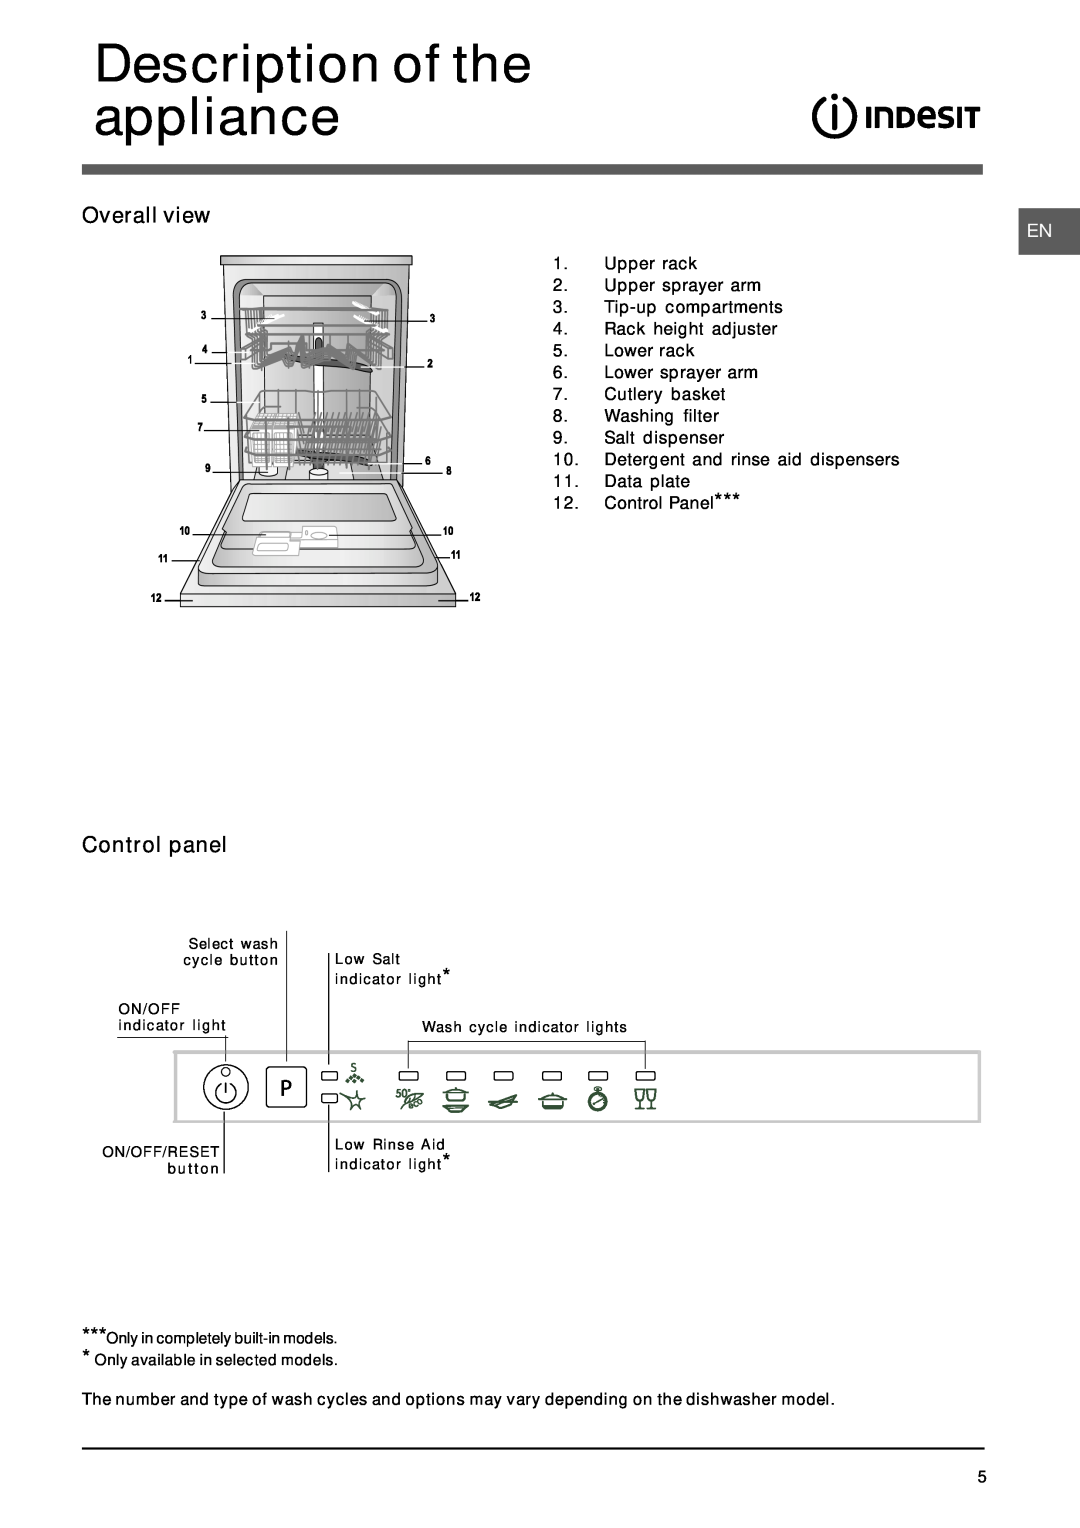 Indesit DIF 1614 operating instructions Description of the appliance, Overall view, Control panel 